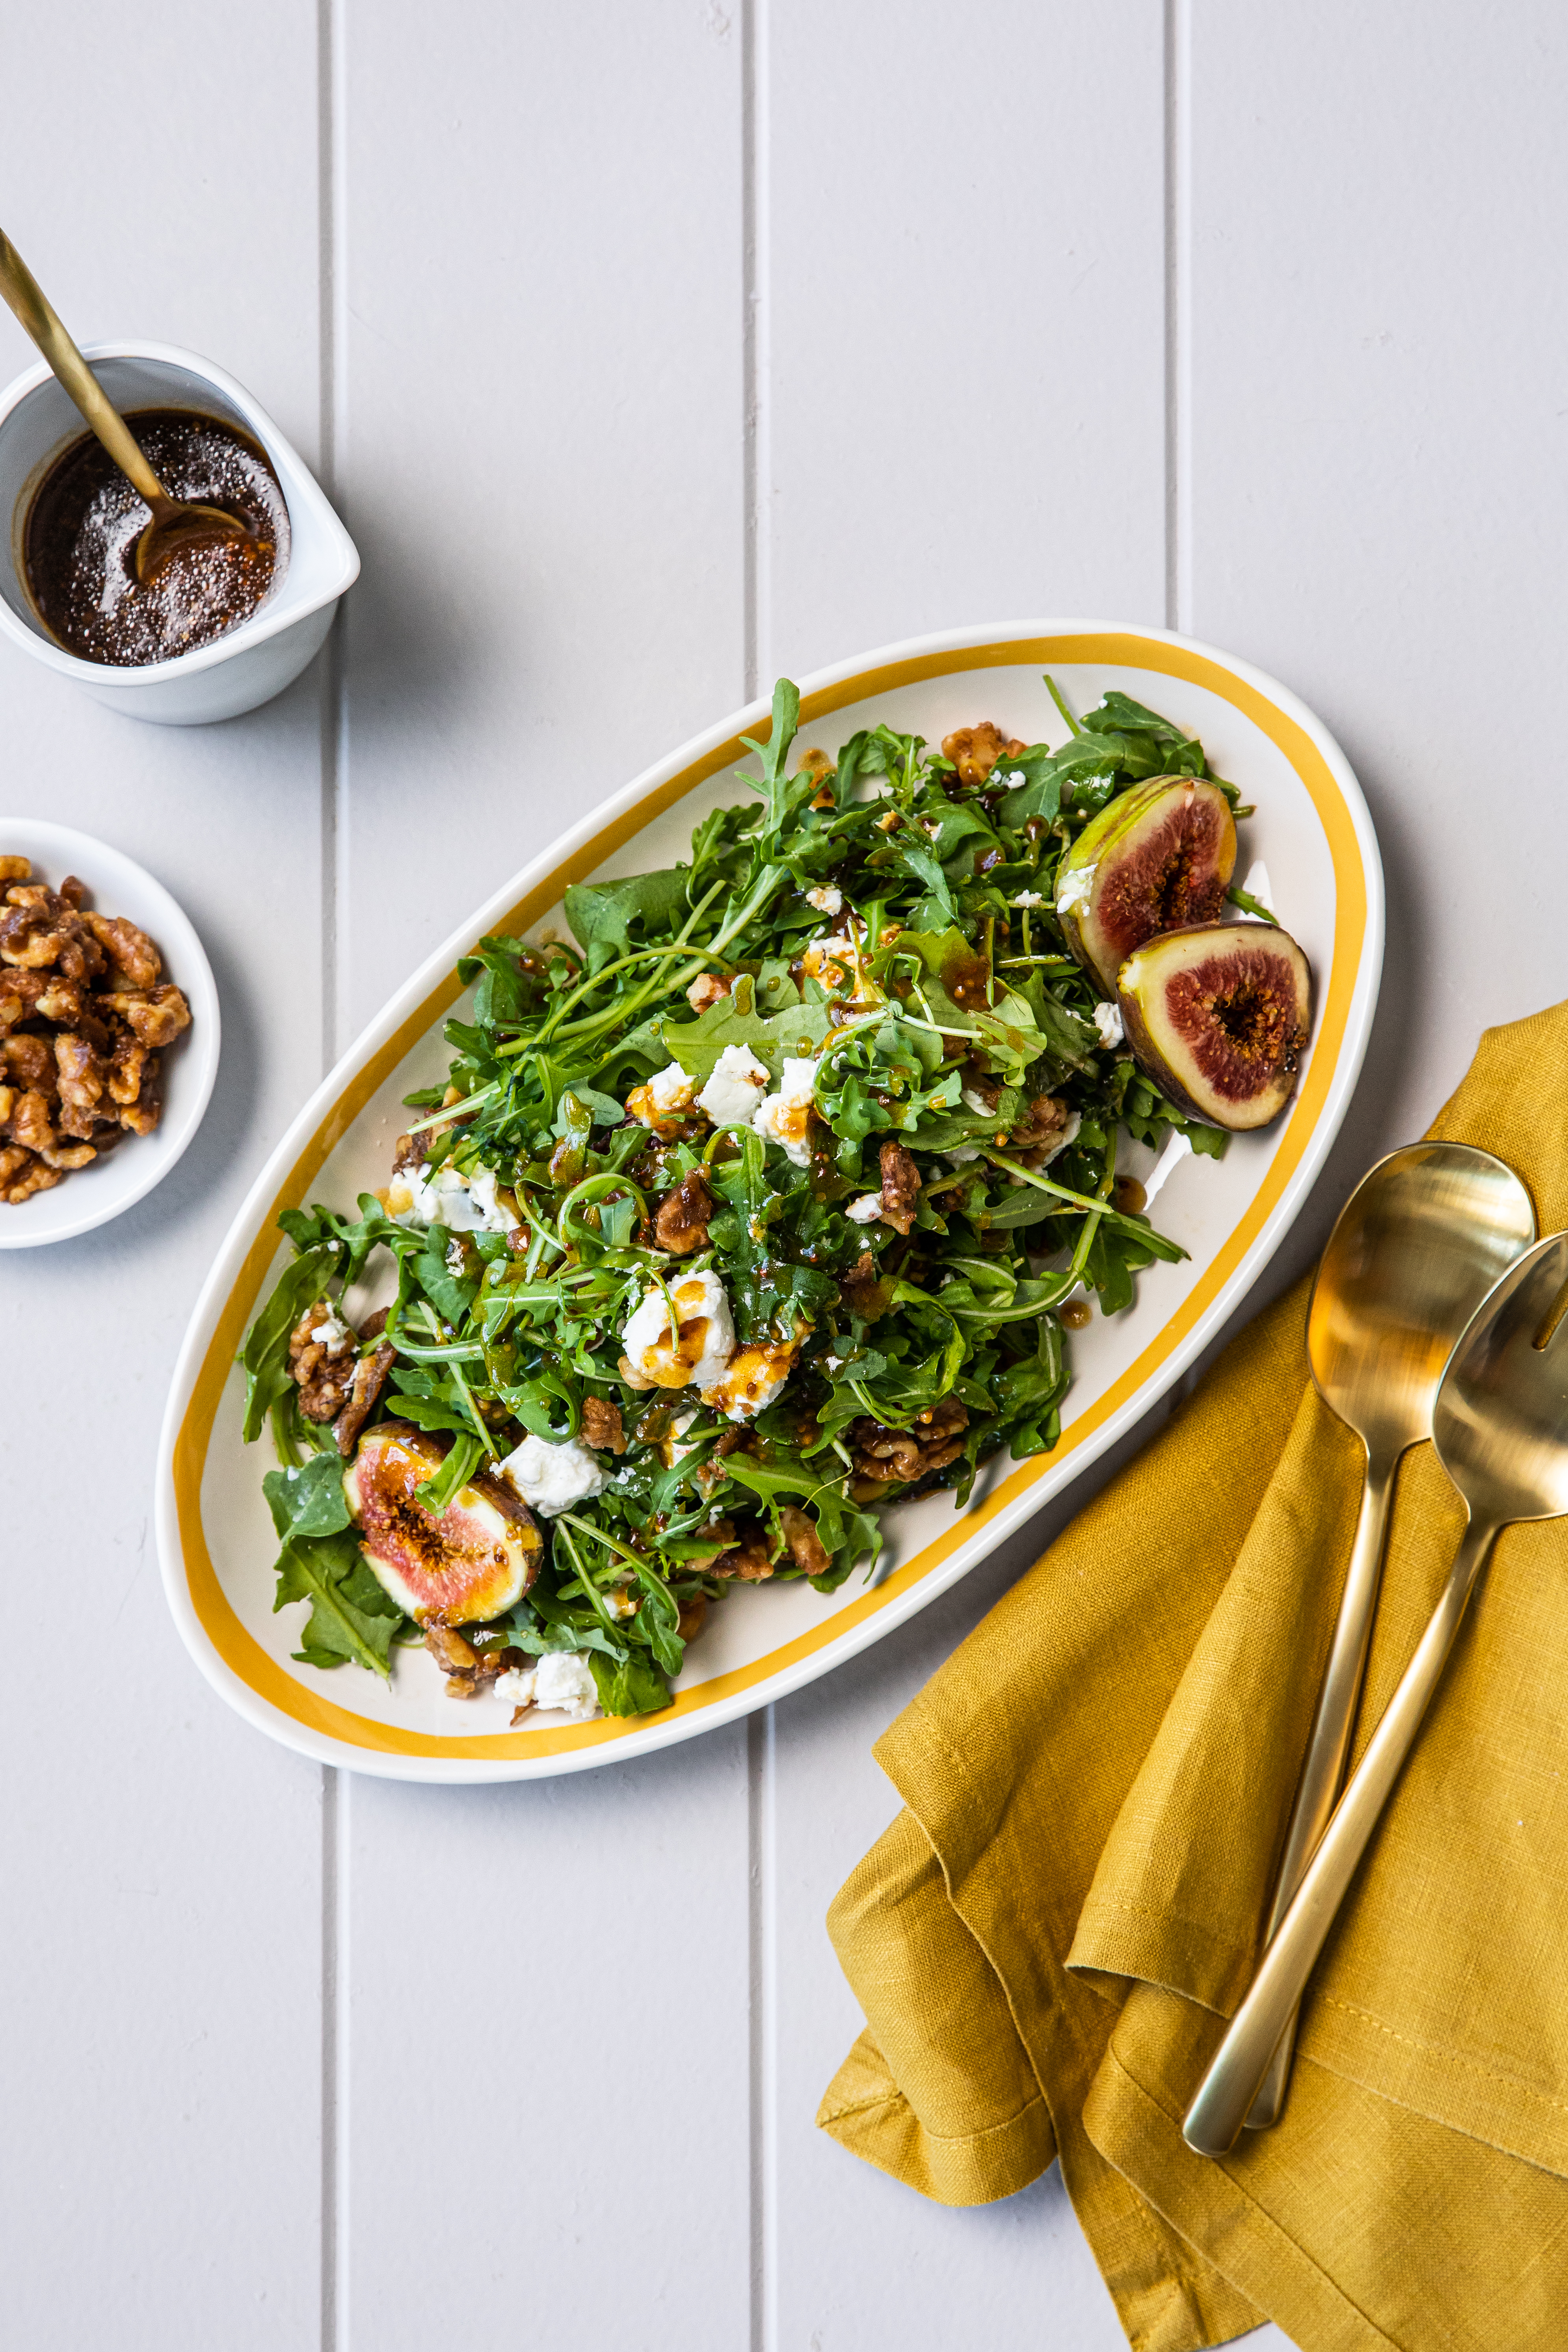 Seasonal salad of rocket, sugared walnuts and figs with a balsamic honey drizzle 